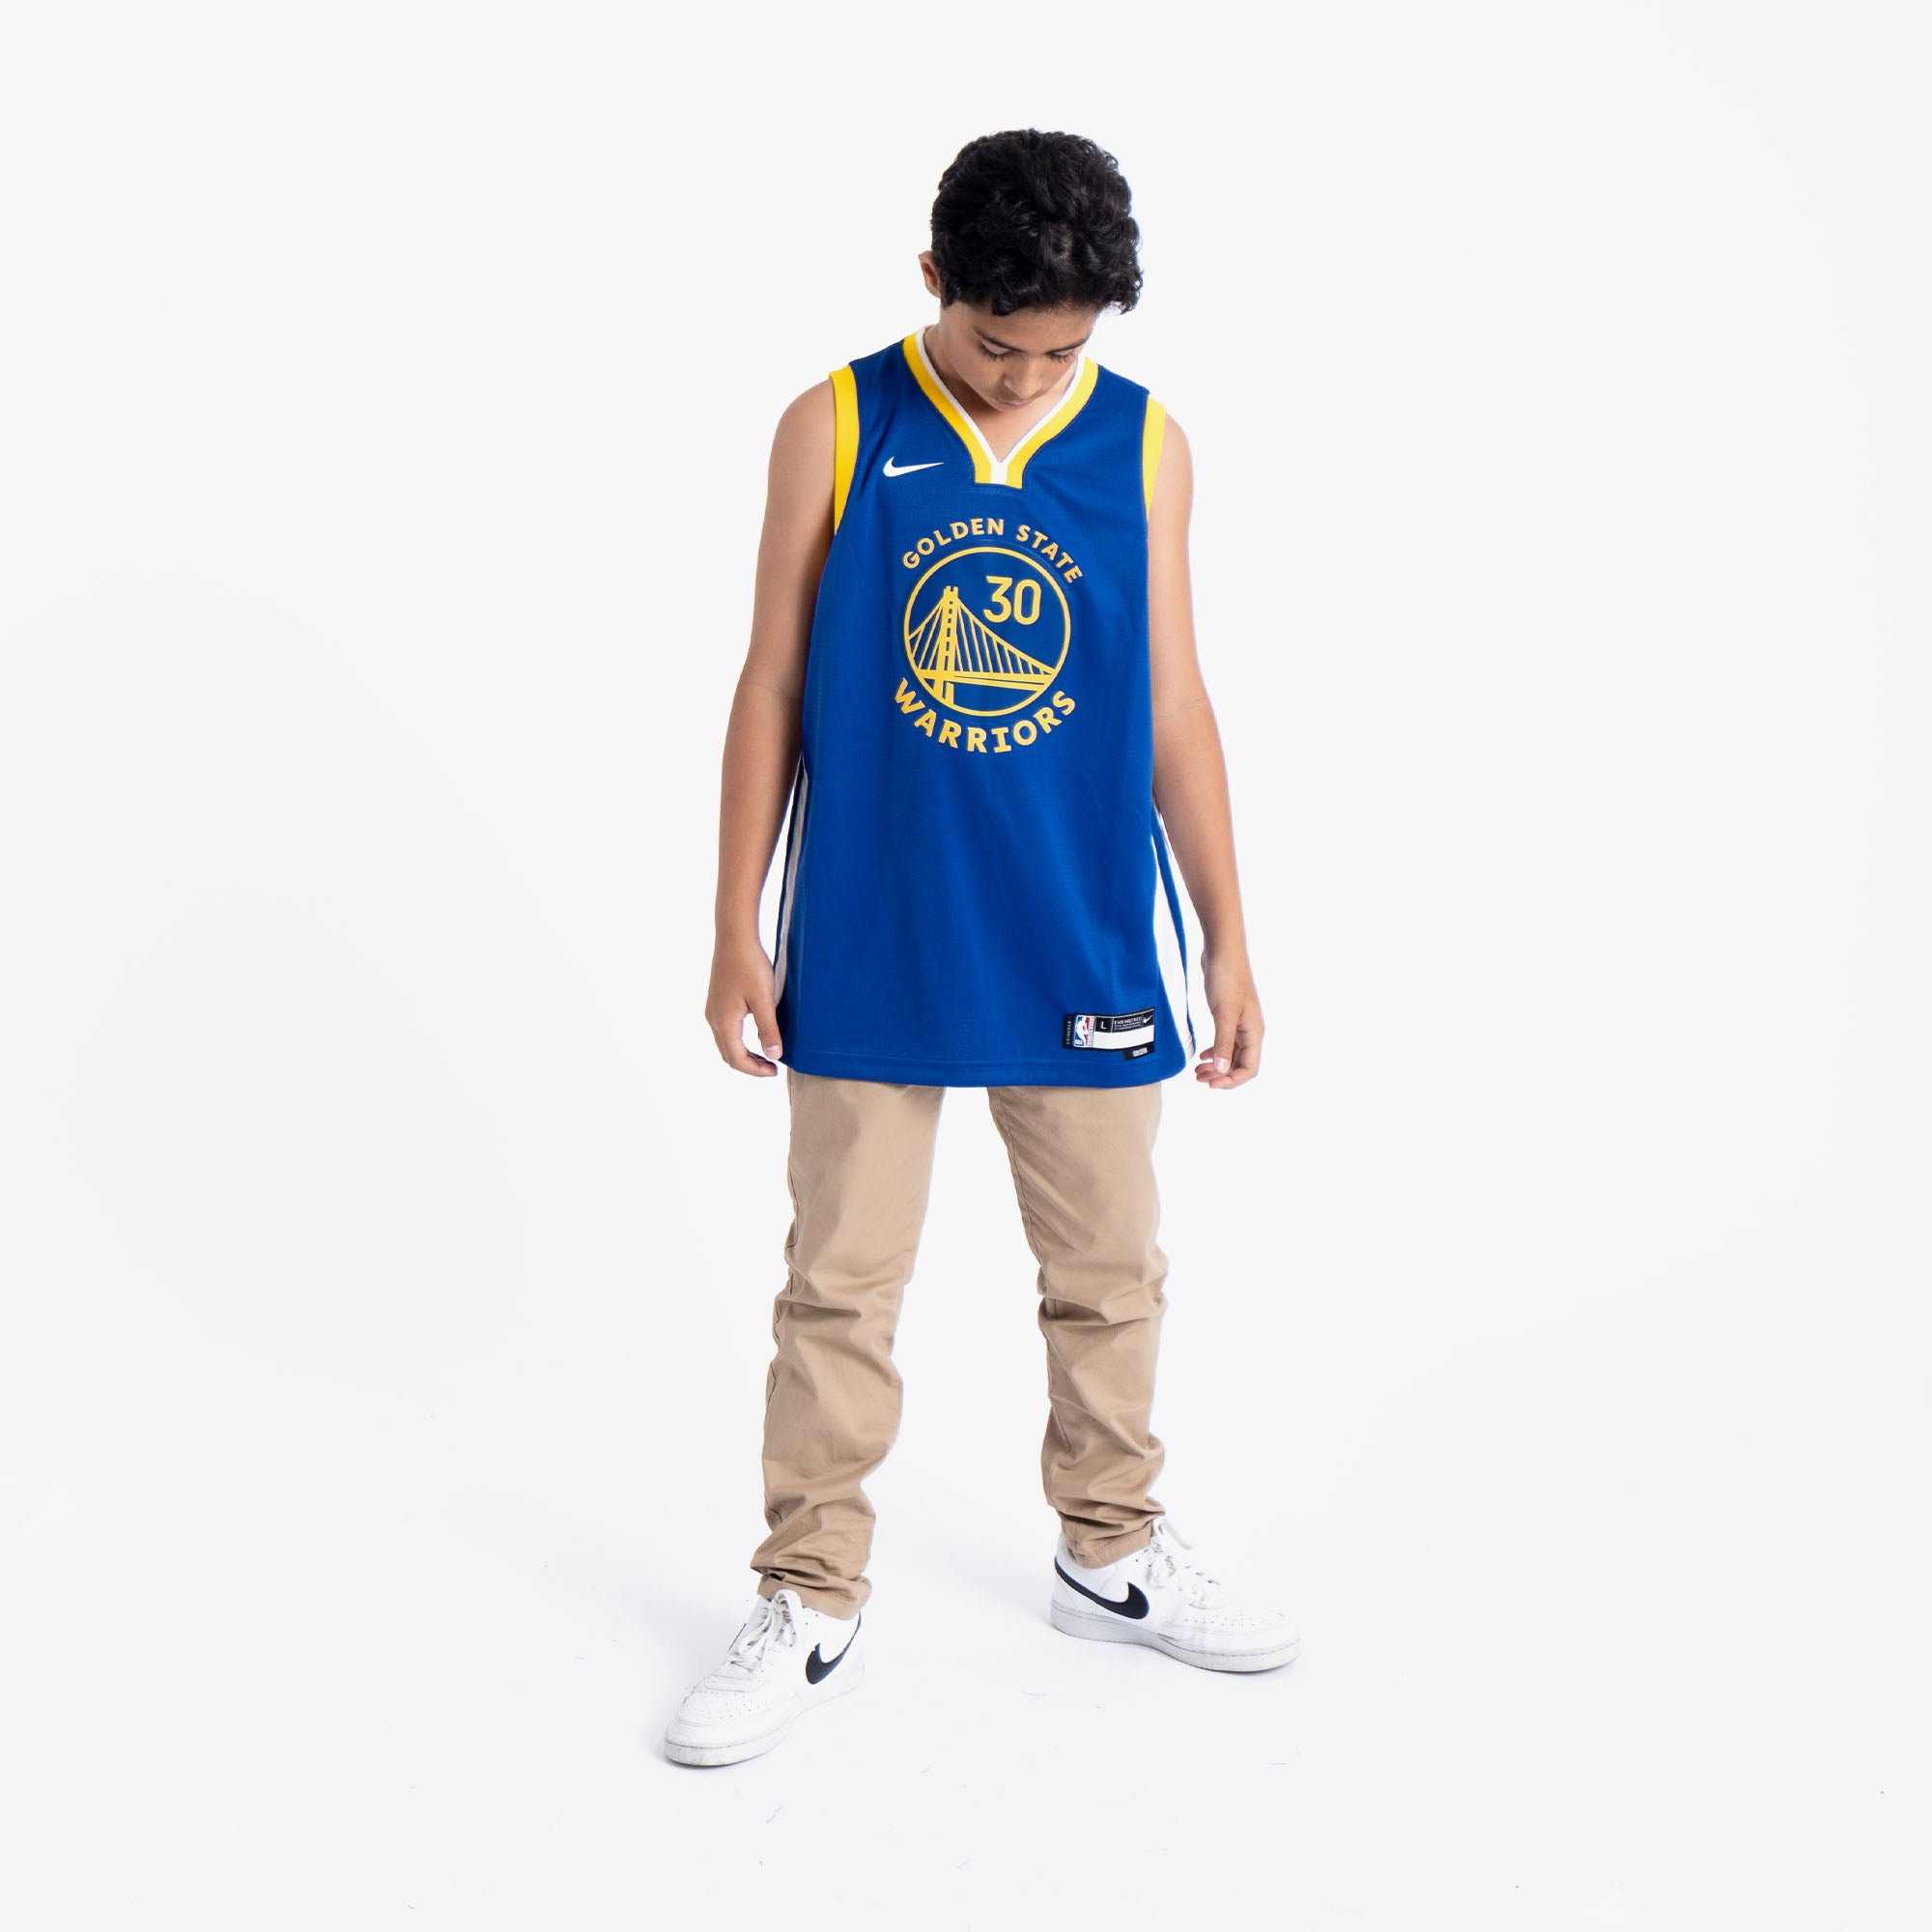 Stephen Curry Golden State Warriors Icon Edition Kids Swingman Jersey -  Throwback